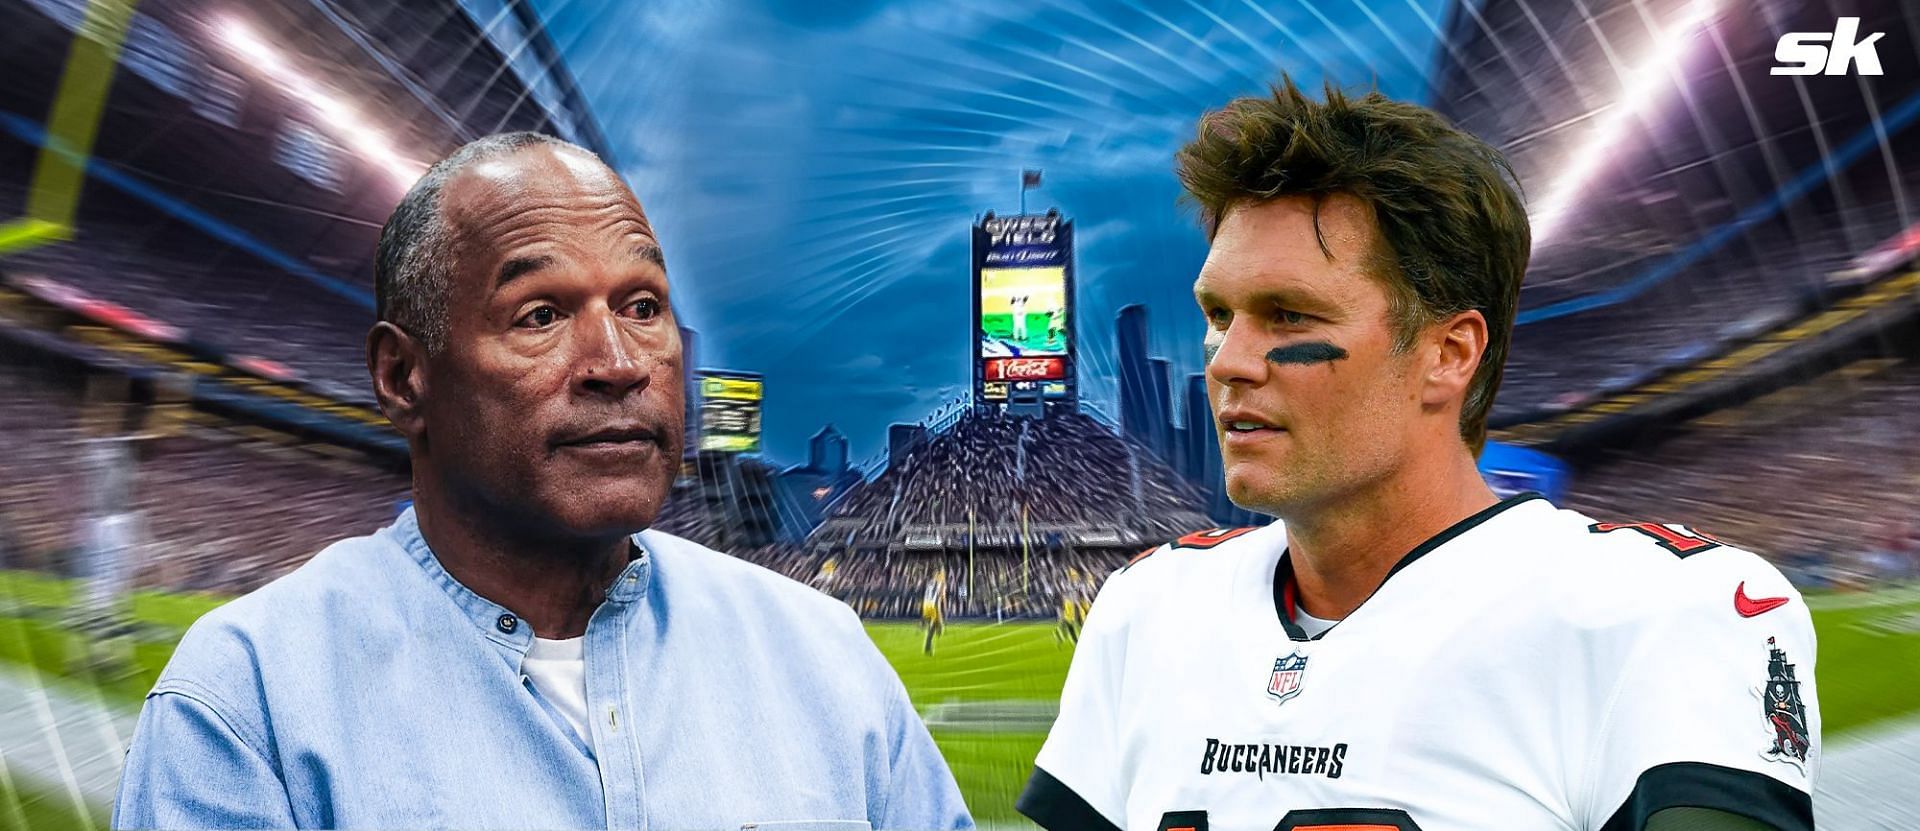 &quot;Closest thing to Tom Brady&quot;: O.J. Simpson confers high honor on $275,000,000 QB